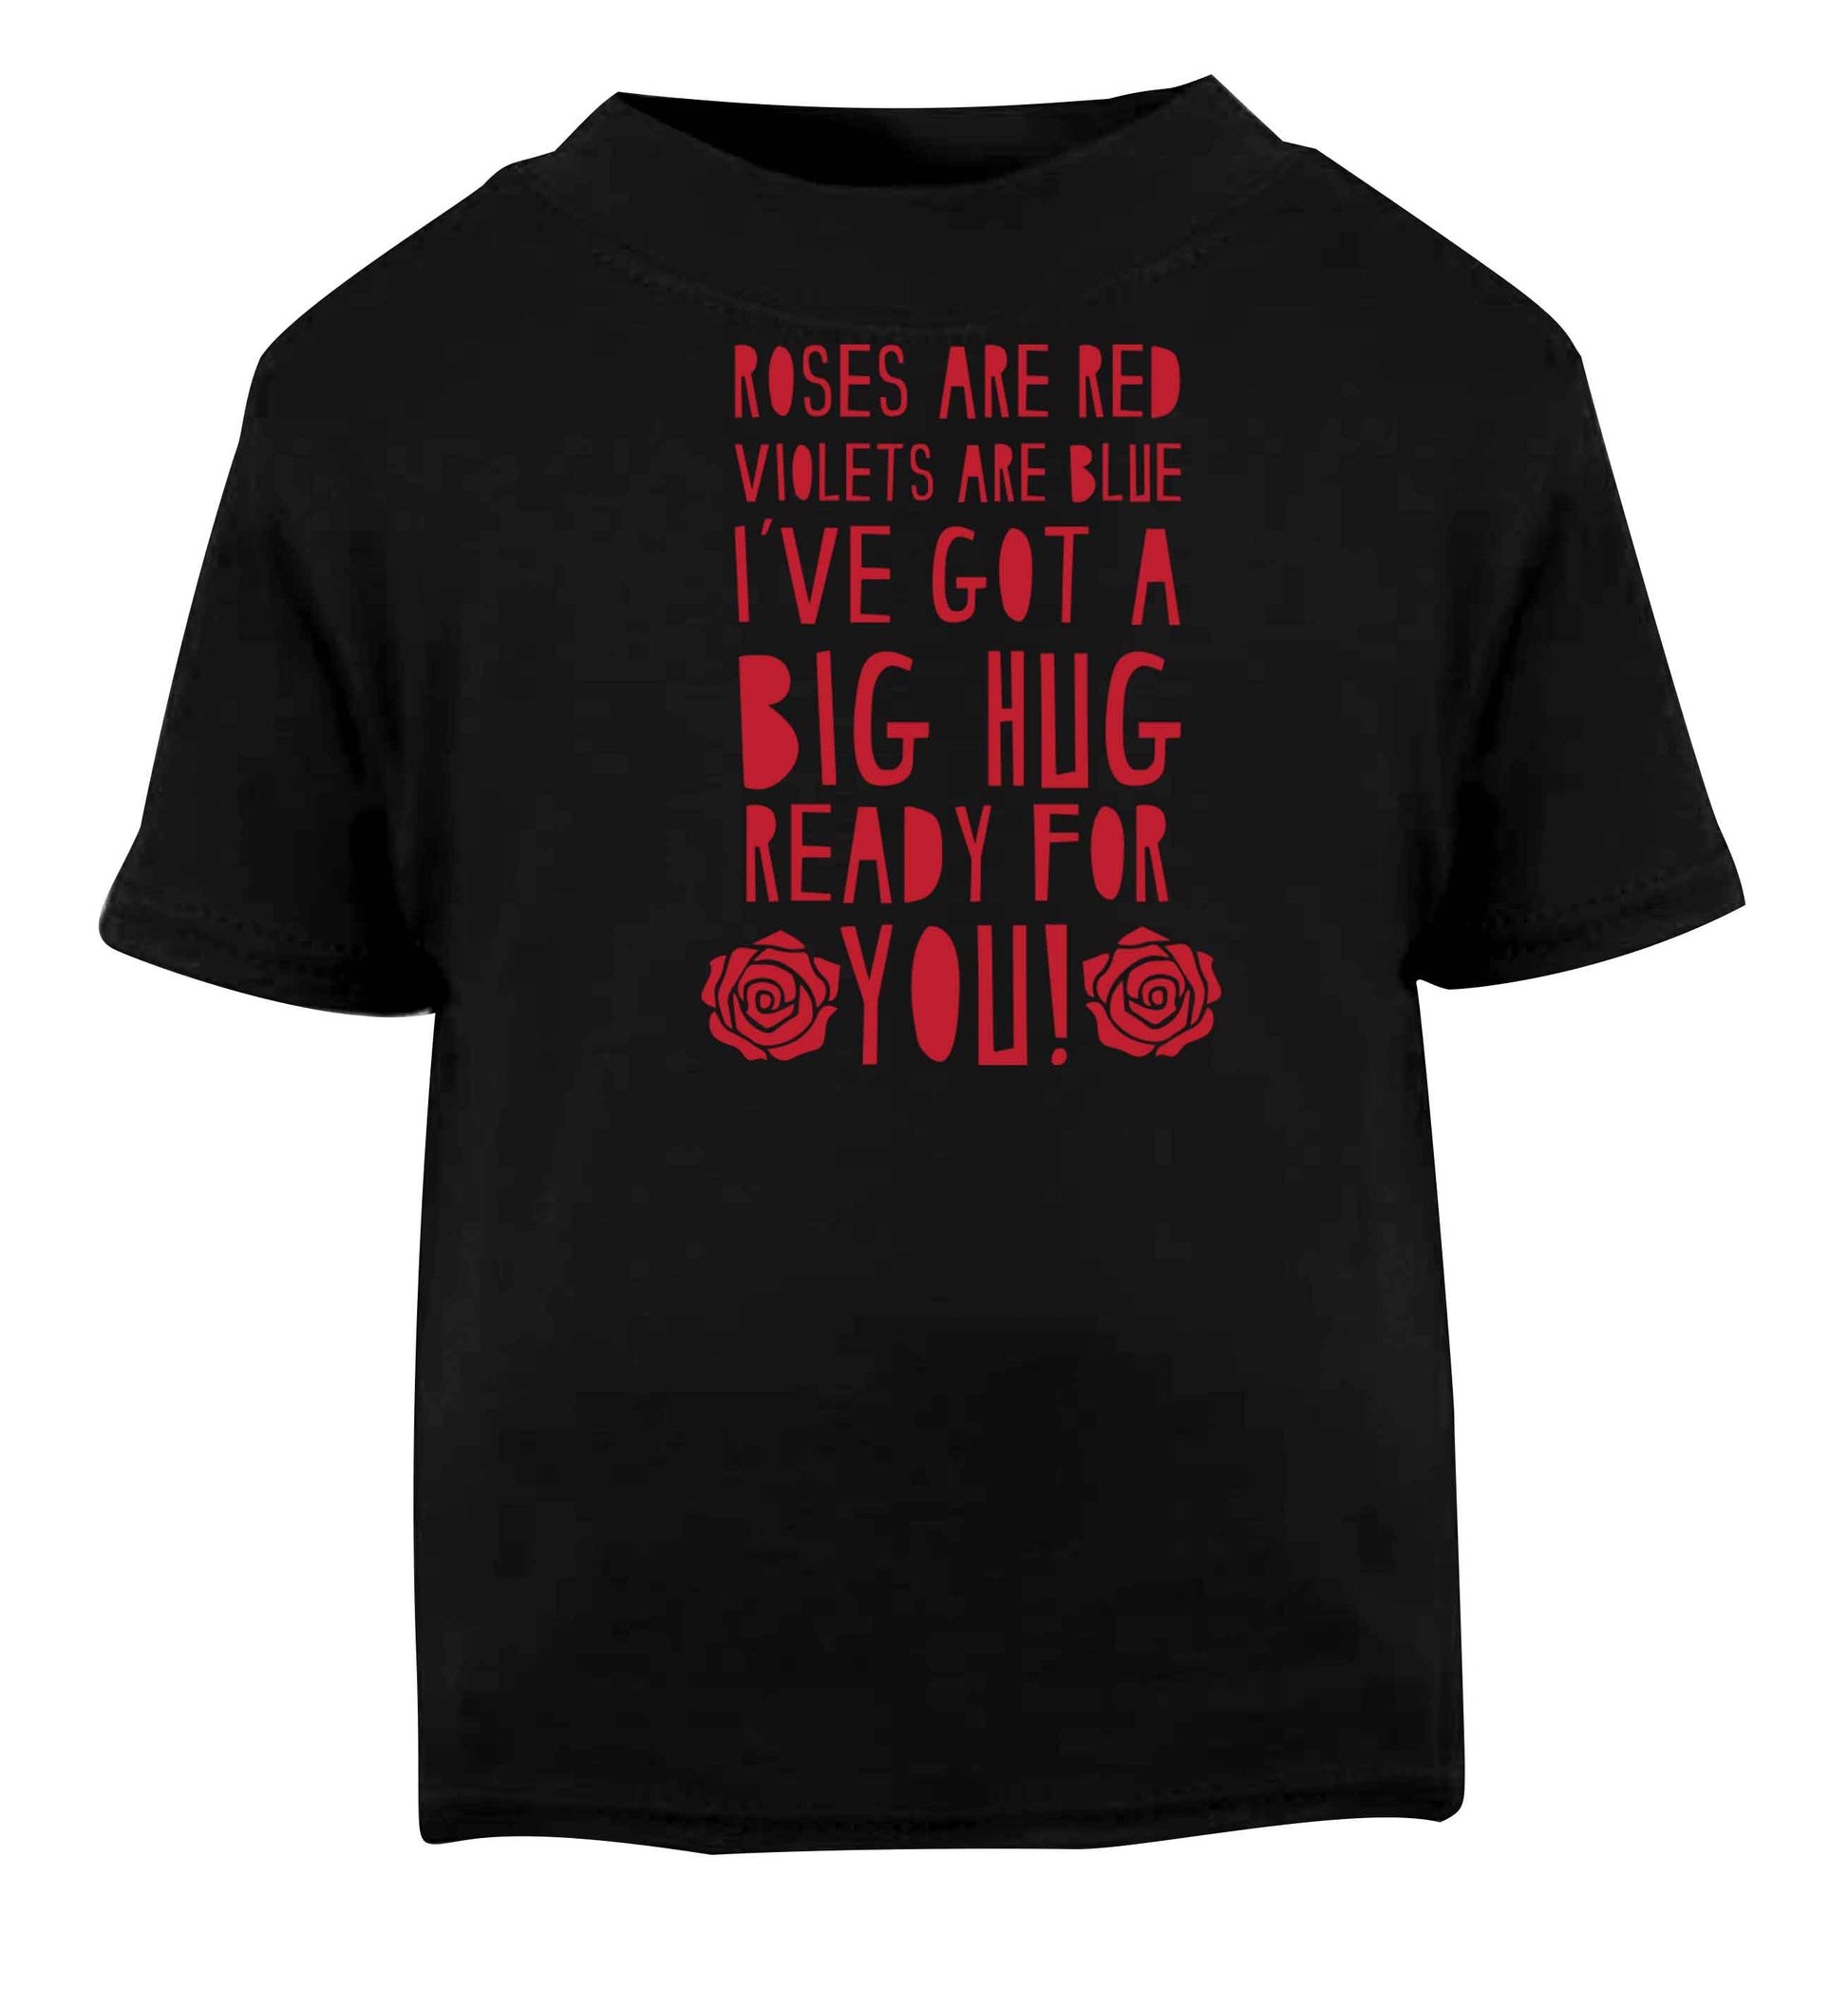 Roses are red violets are blue I've got a big hug coming for you Black baby toddler Tshirt 2 years